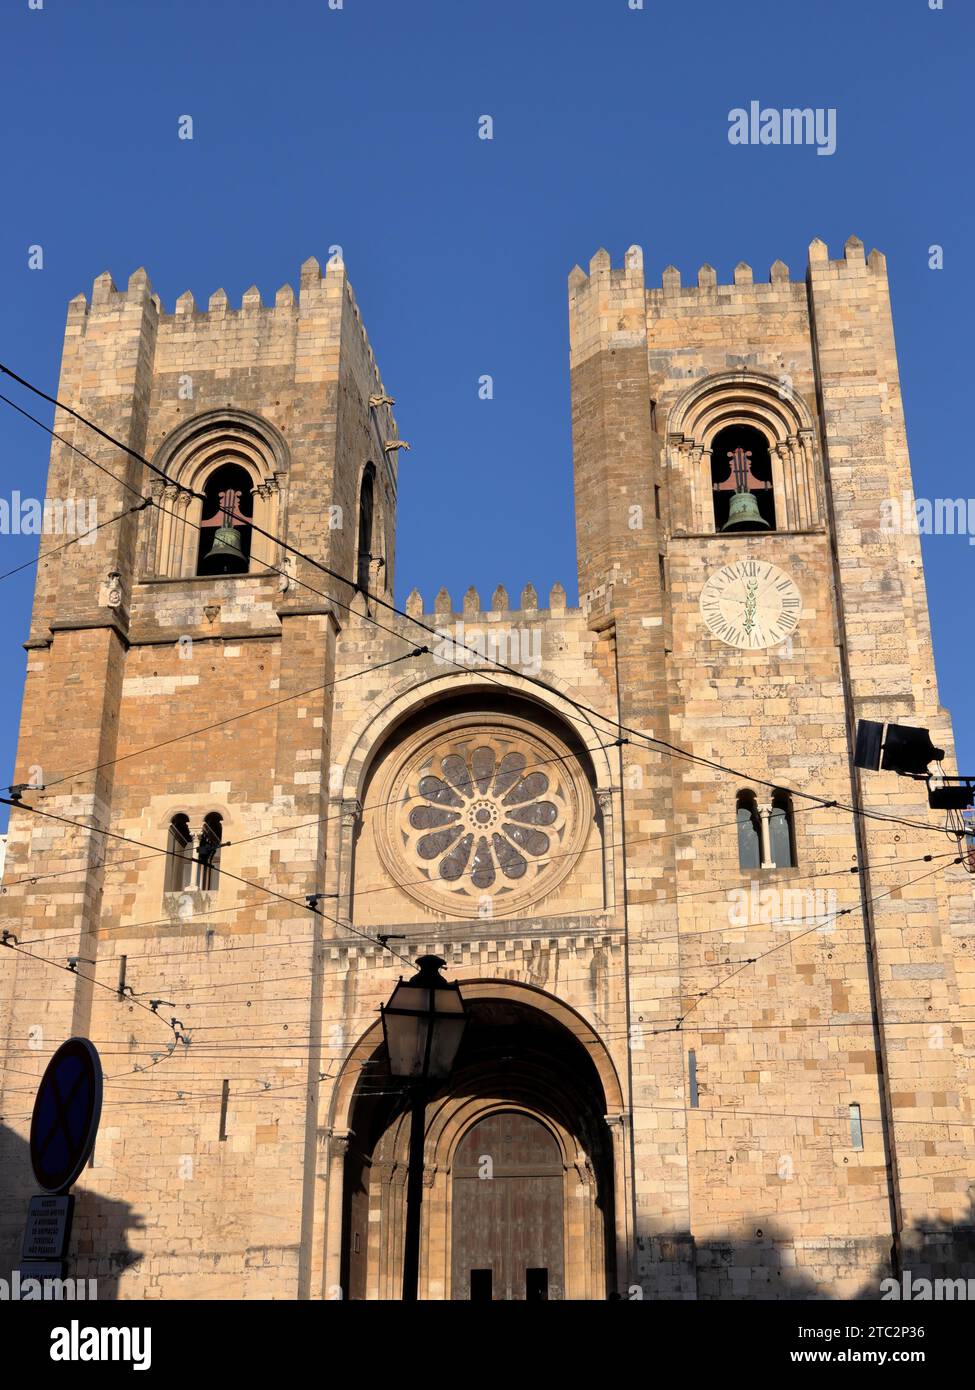 The Cathedral of Saint Mary Major, often called Lisbon Cathedral or the Sé, the oldest church in the city,  the seat of the Patriarchate of Lisbon Stock Photo